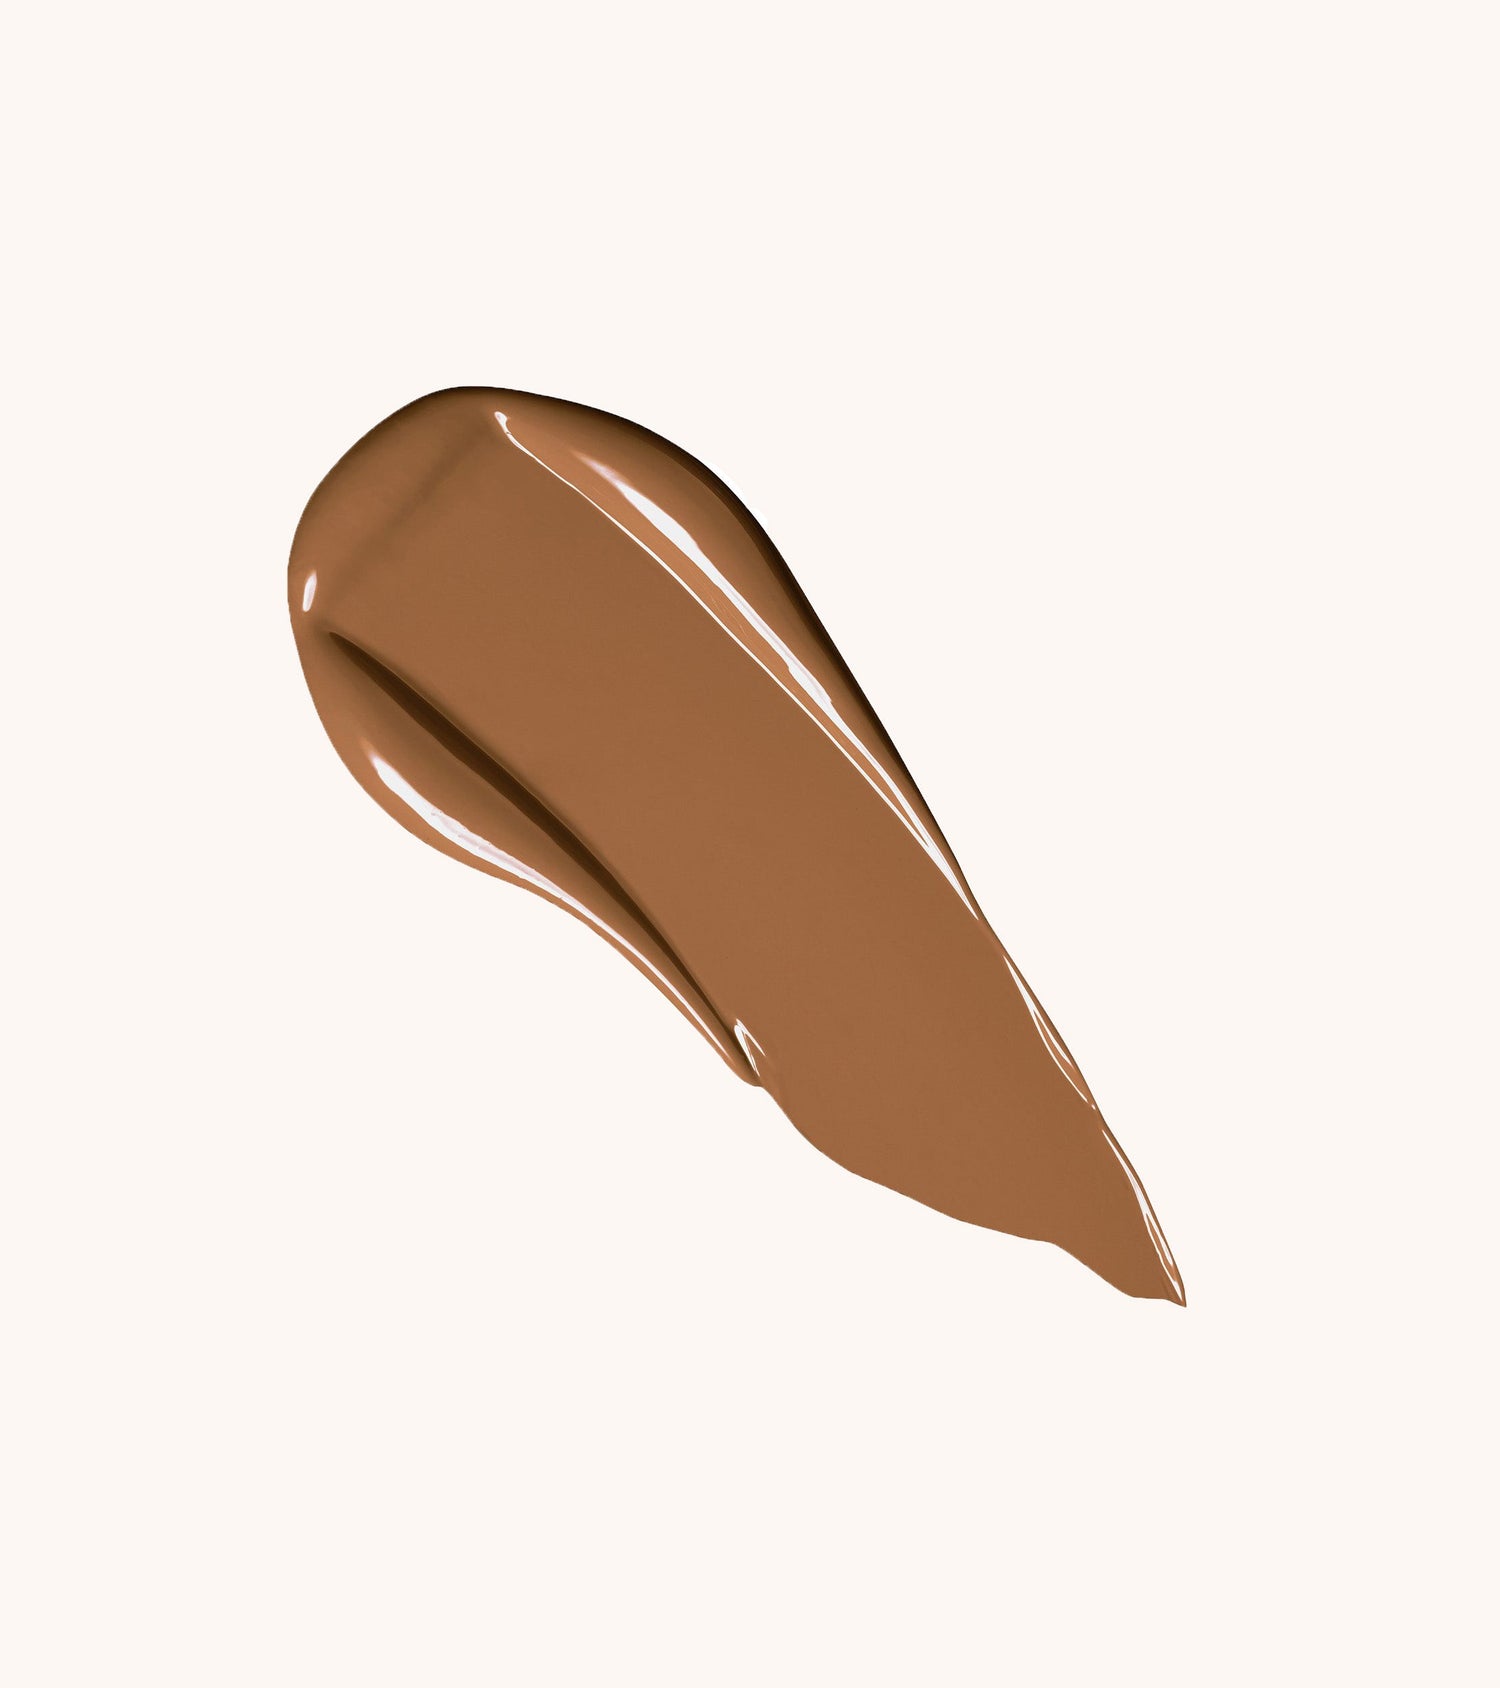 Authentik Skin Perfector Concealer (240 Sincere) Main Image featured